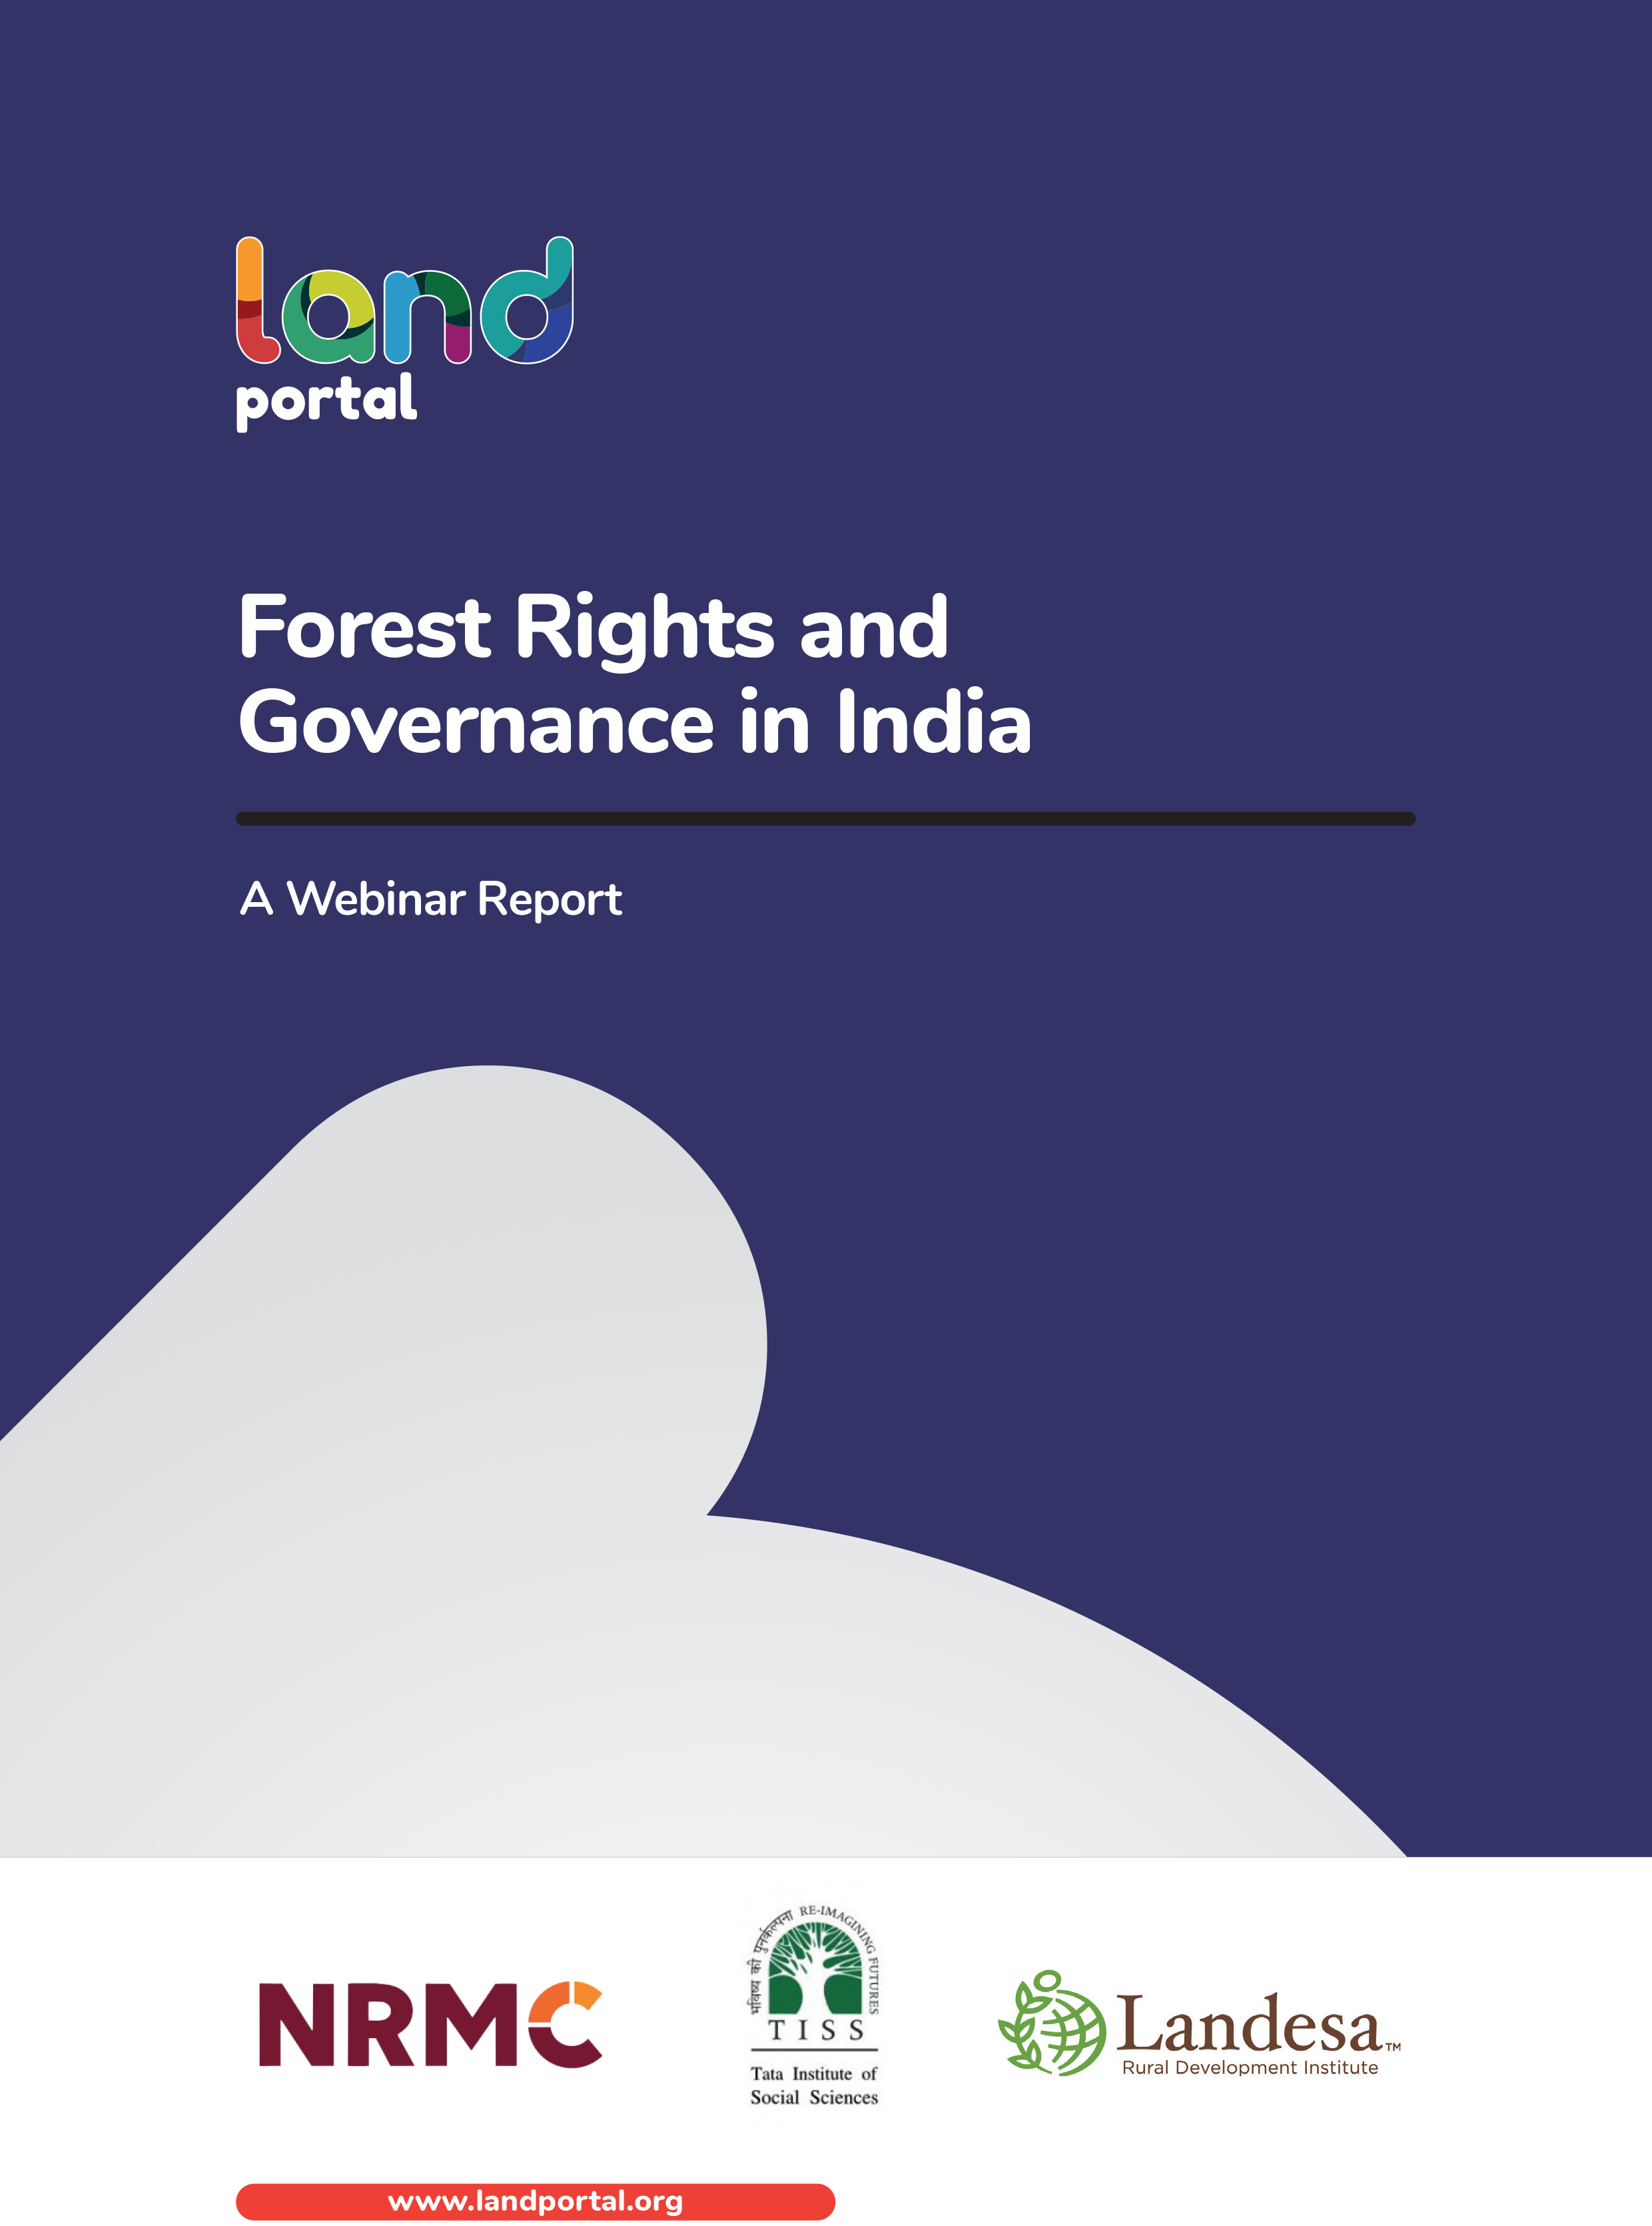 Forest Rights and Governance in India